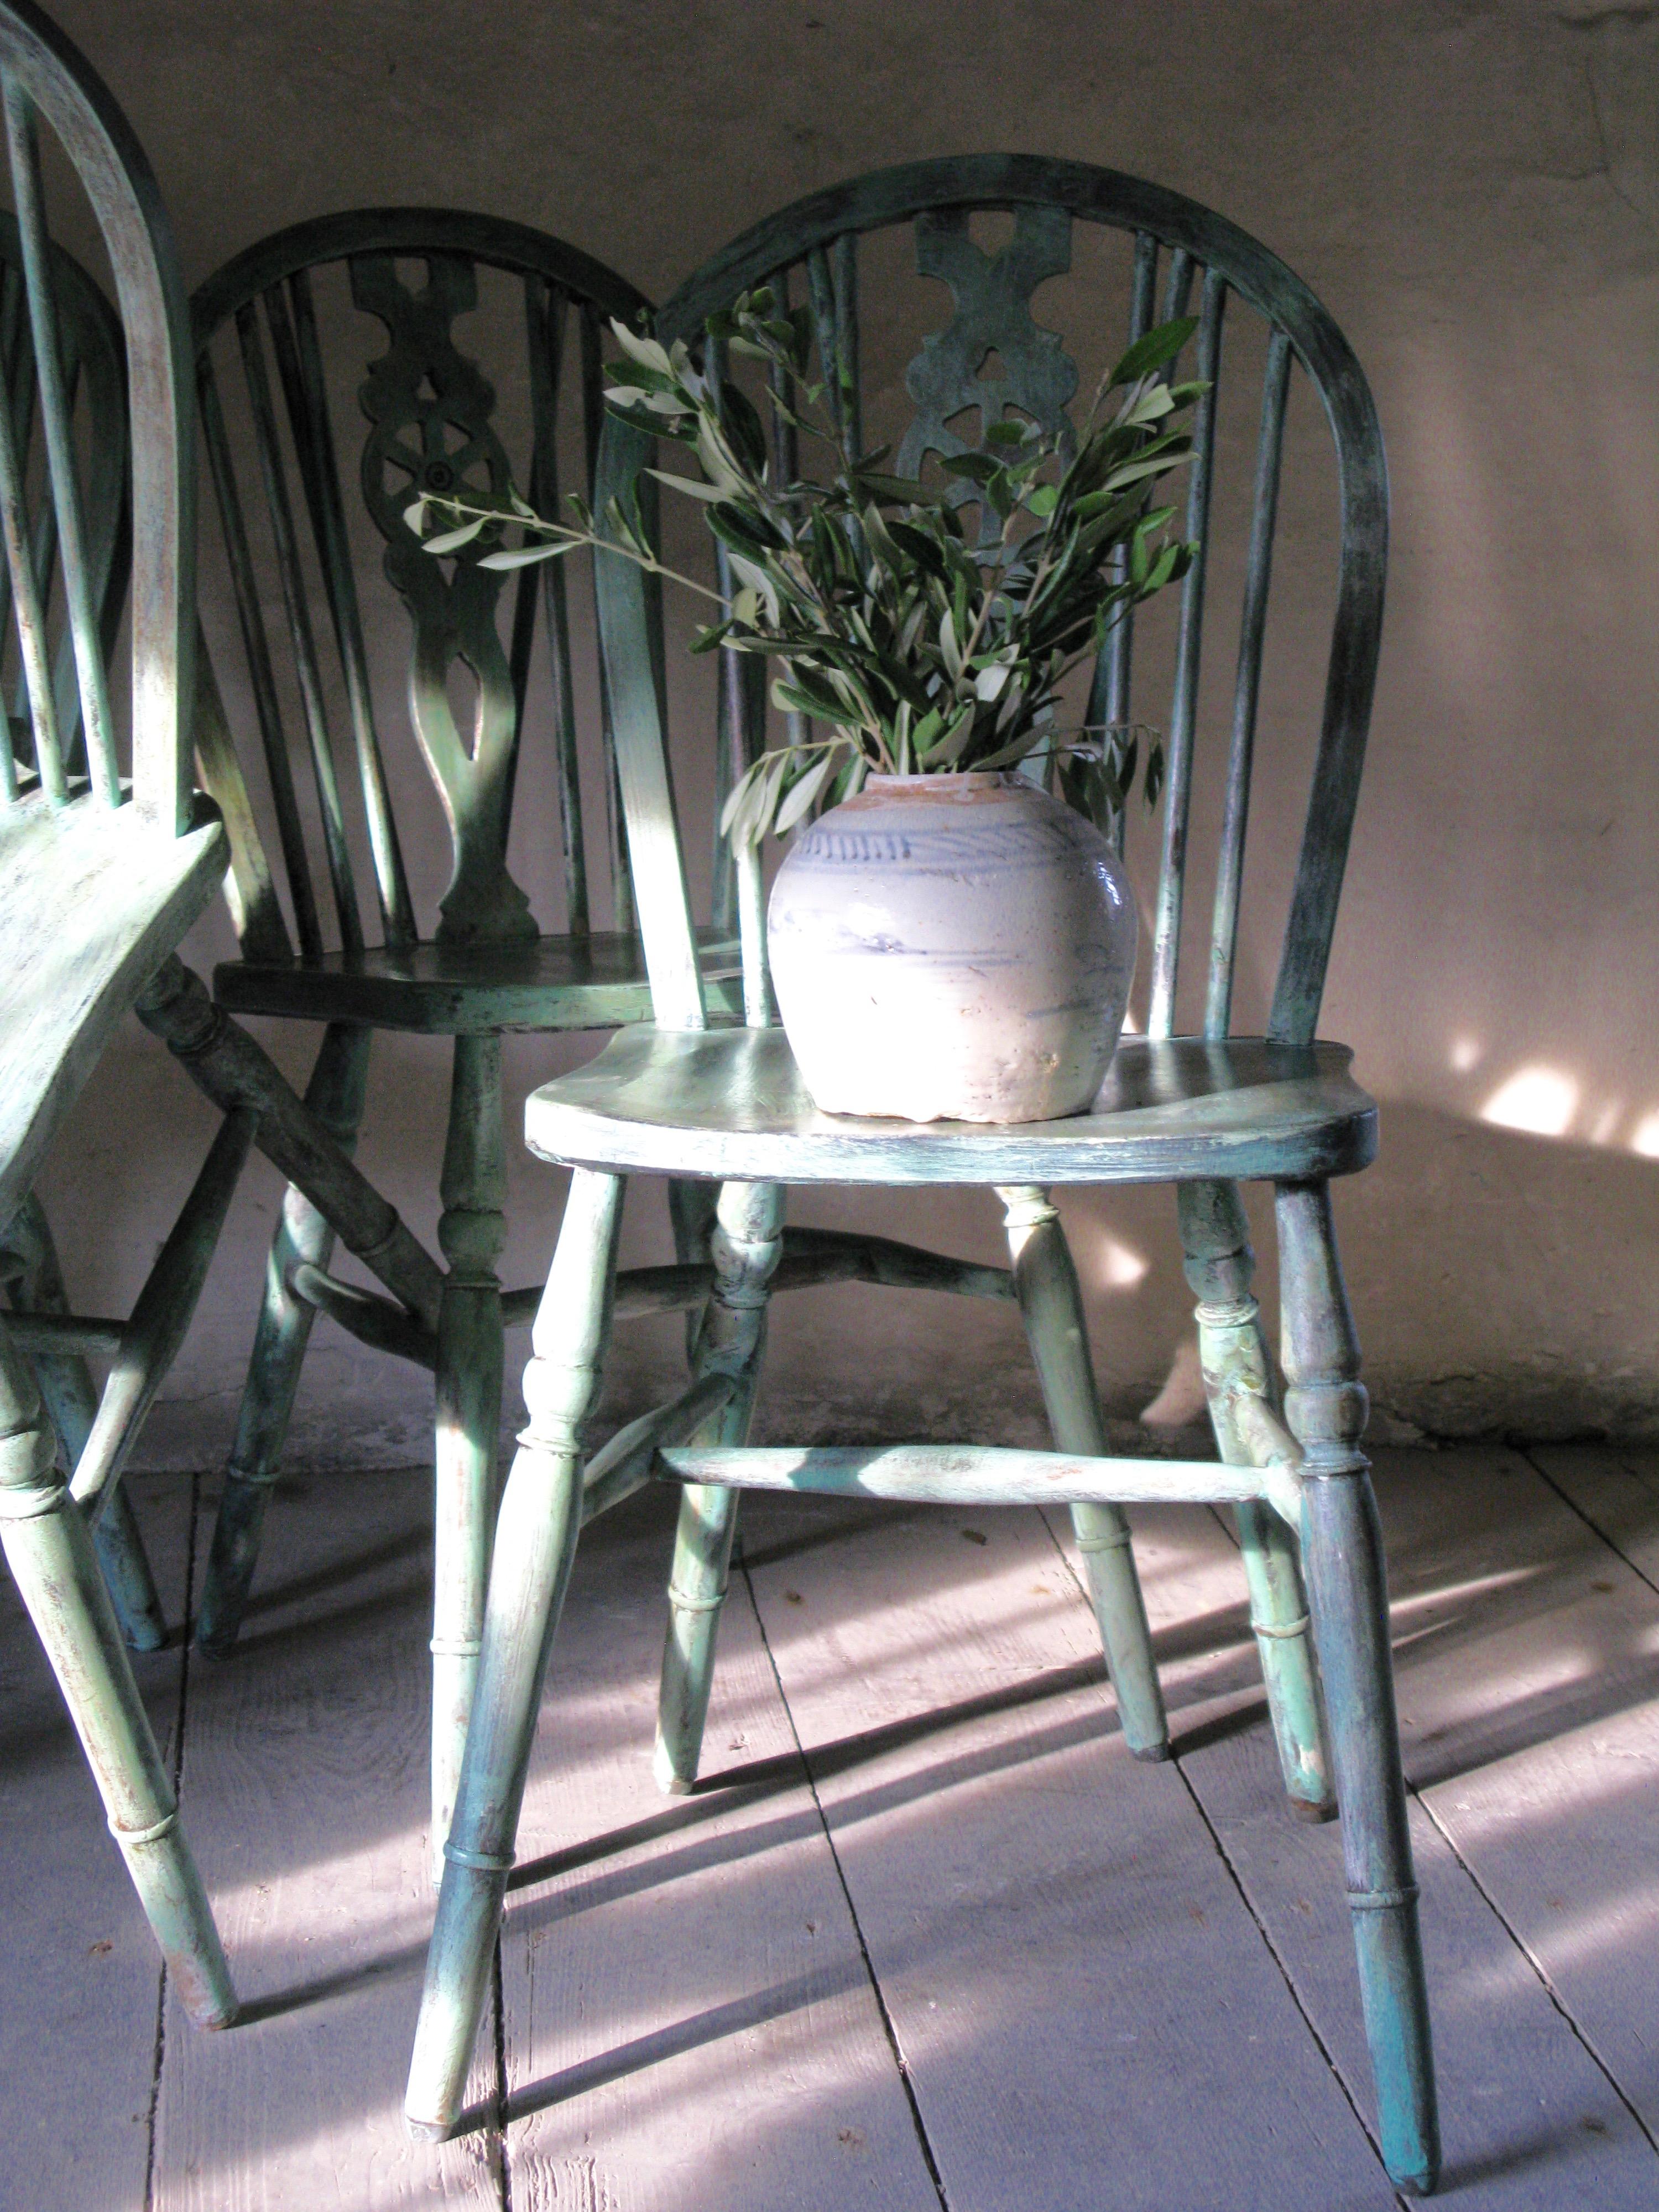 British Set of 4 Windsor Chairs, English, Antique Windsor Chairs, Decorative, Painted For Sale